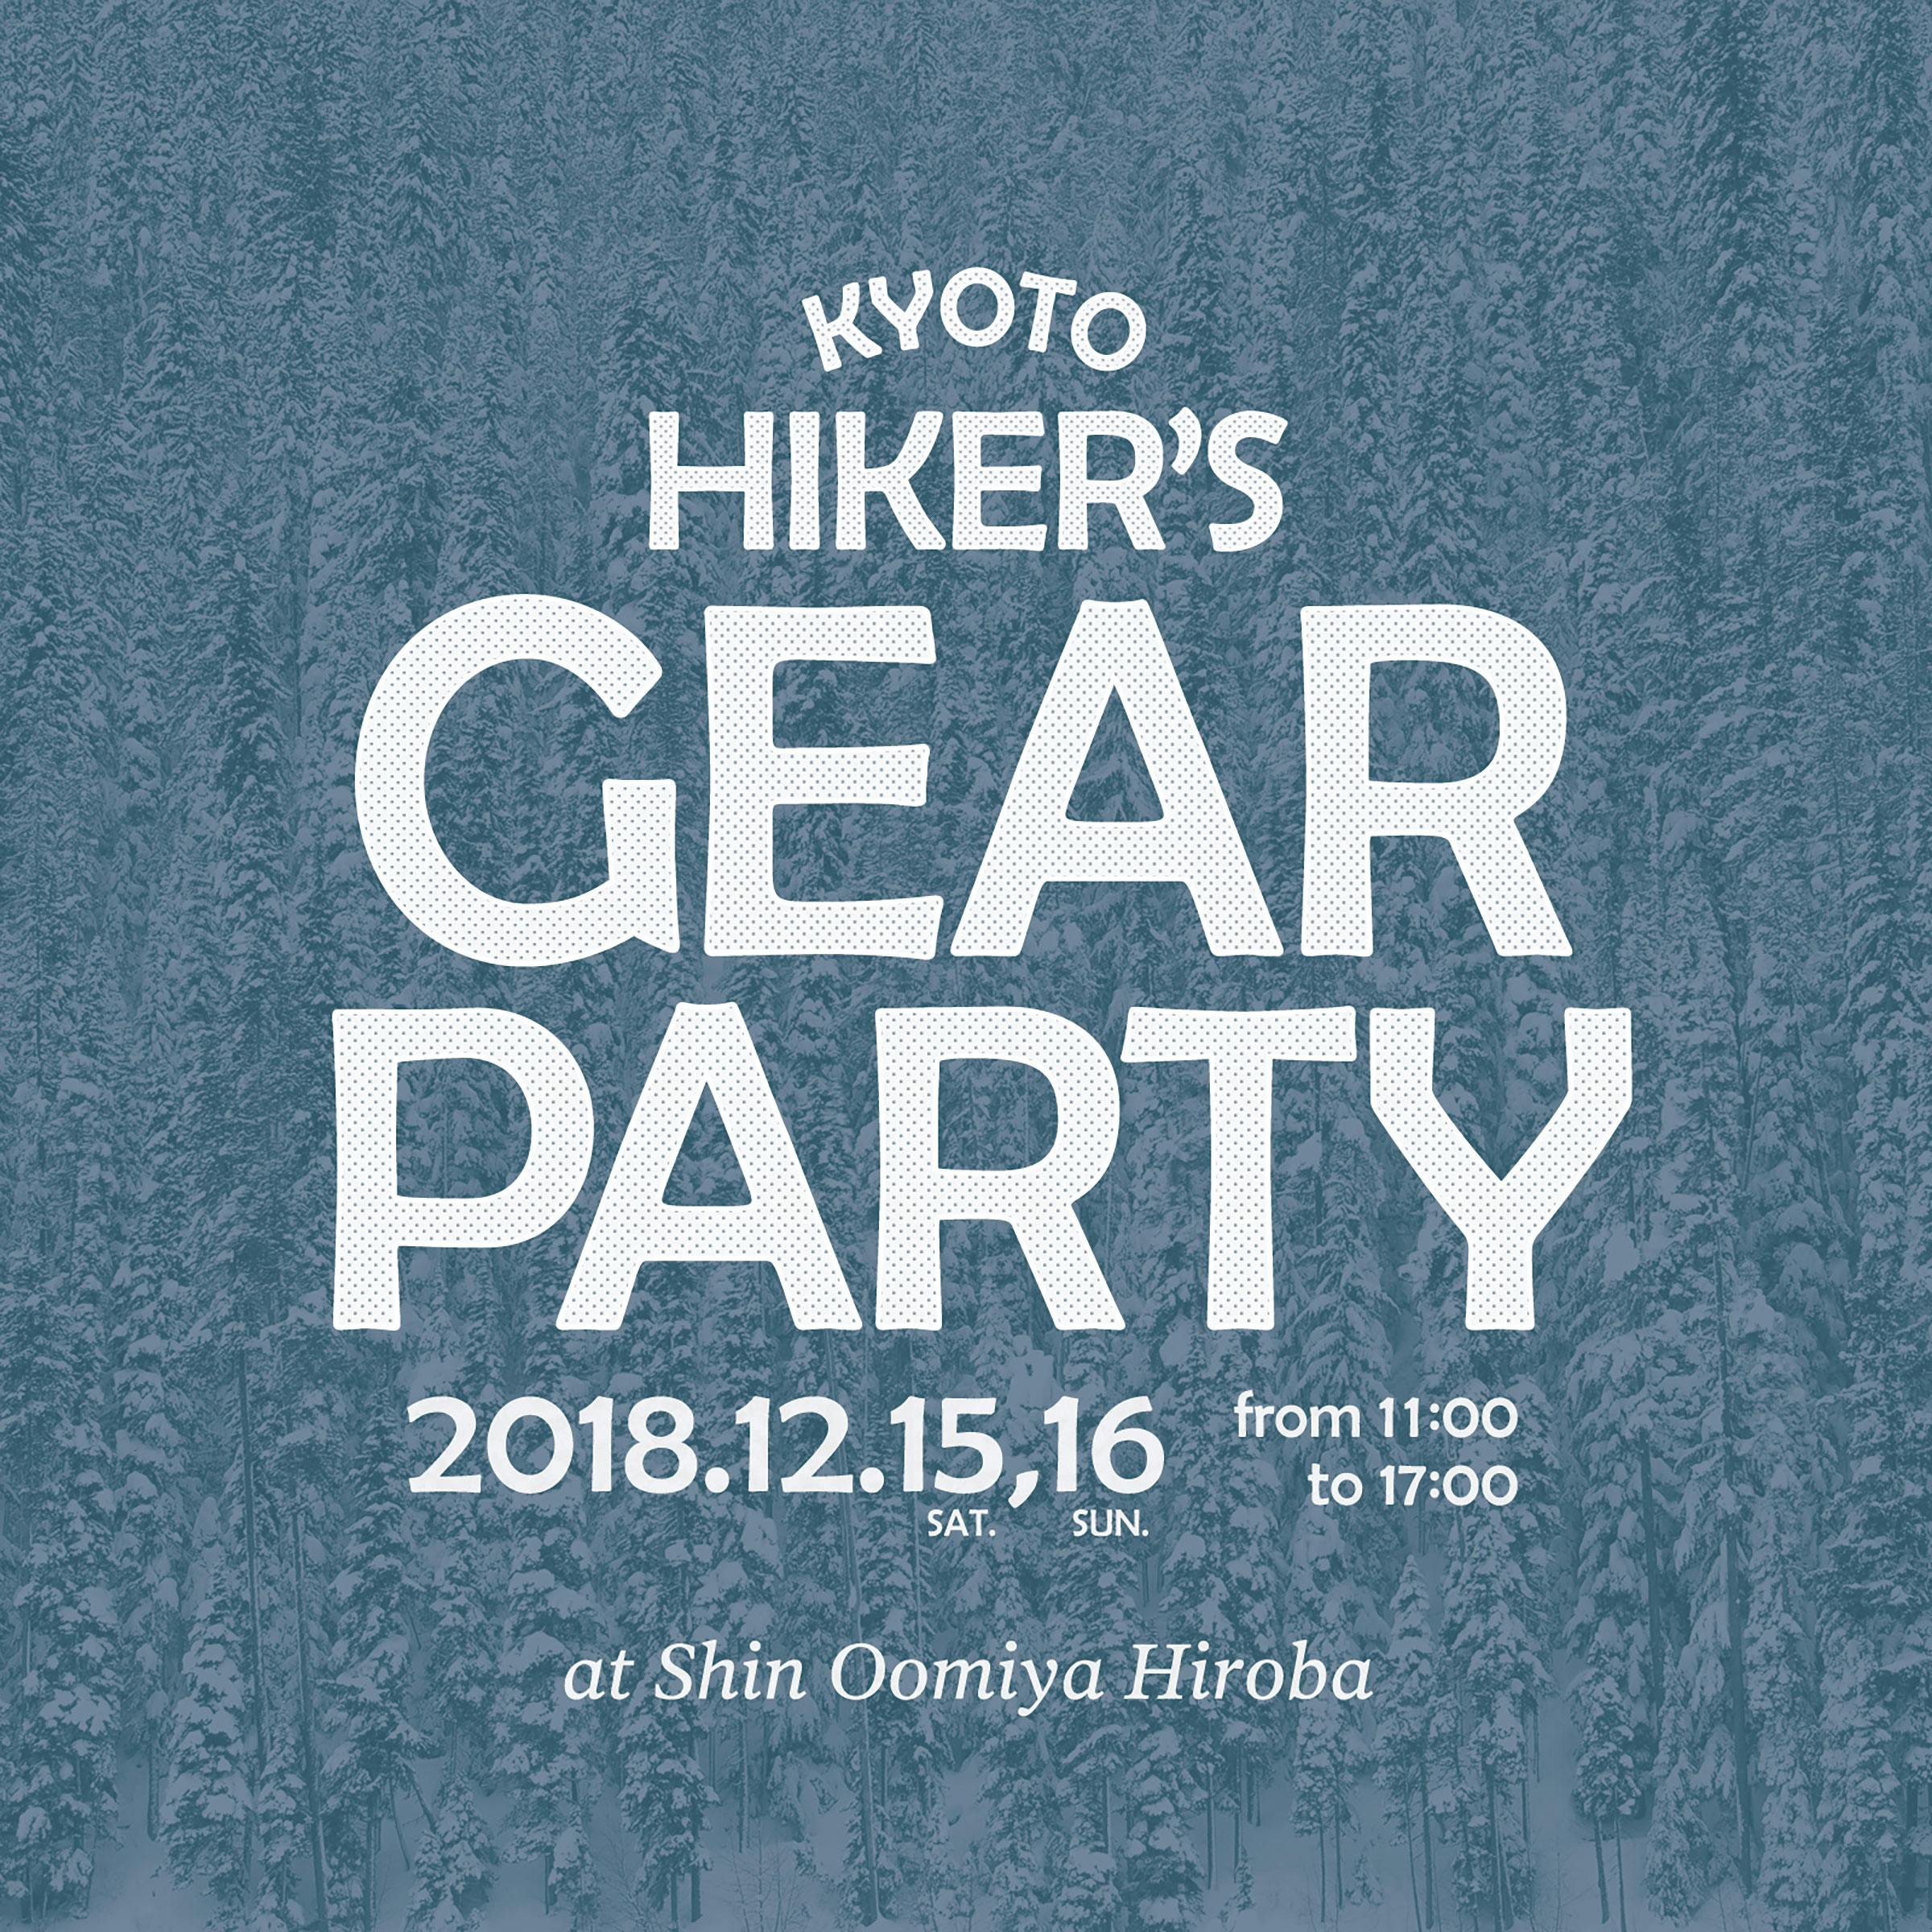 KYOTO HIKER’S GEAR PARTYに出店いたします